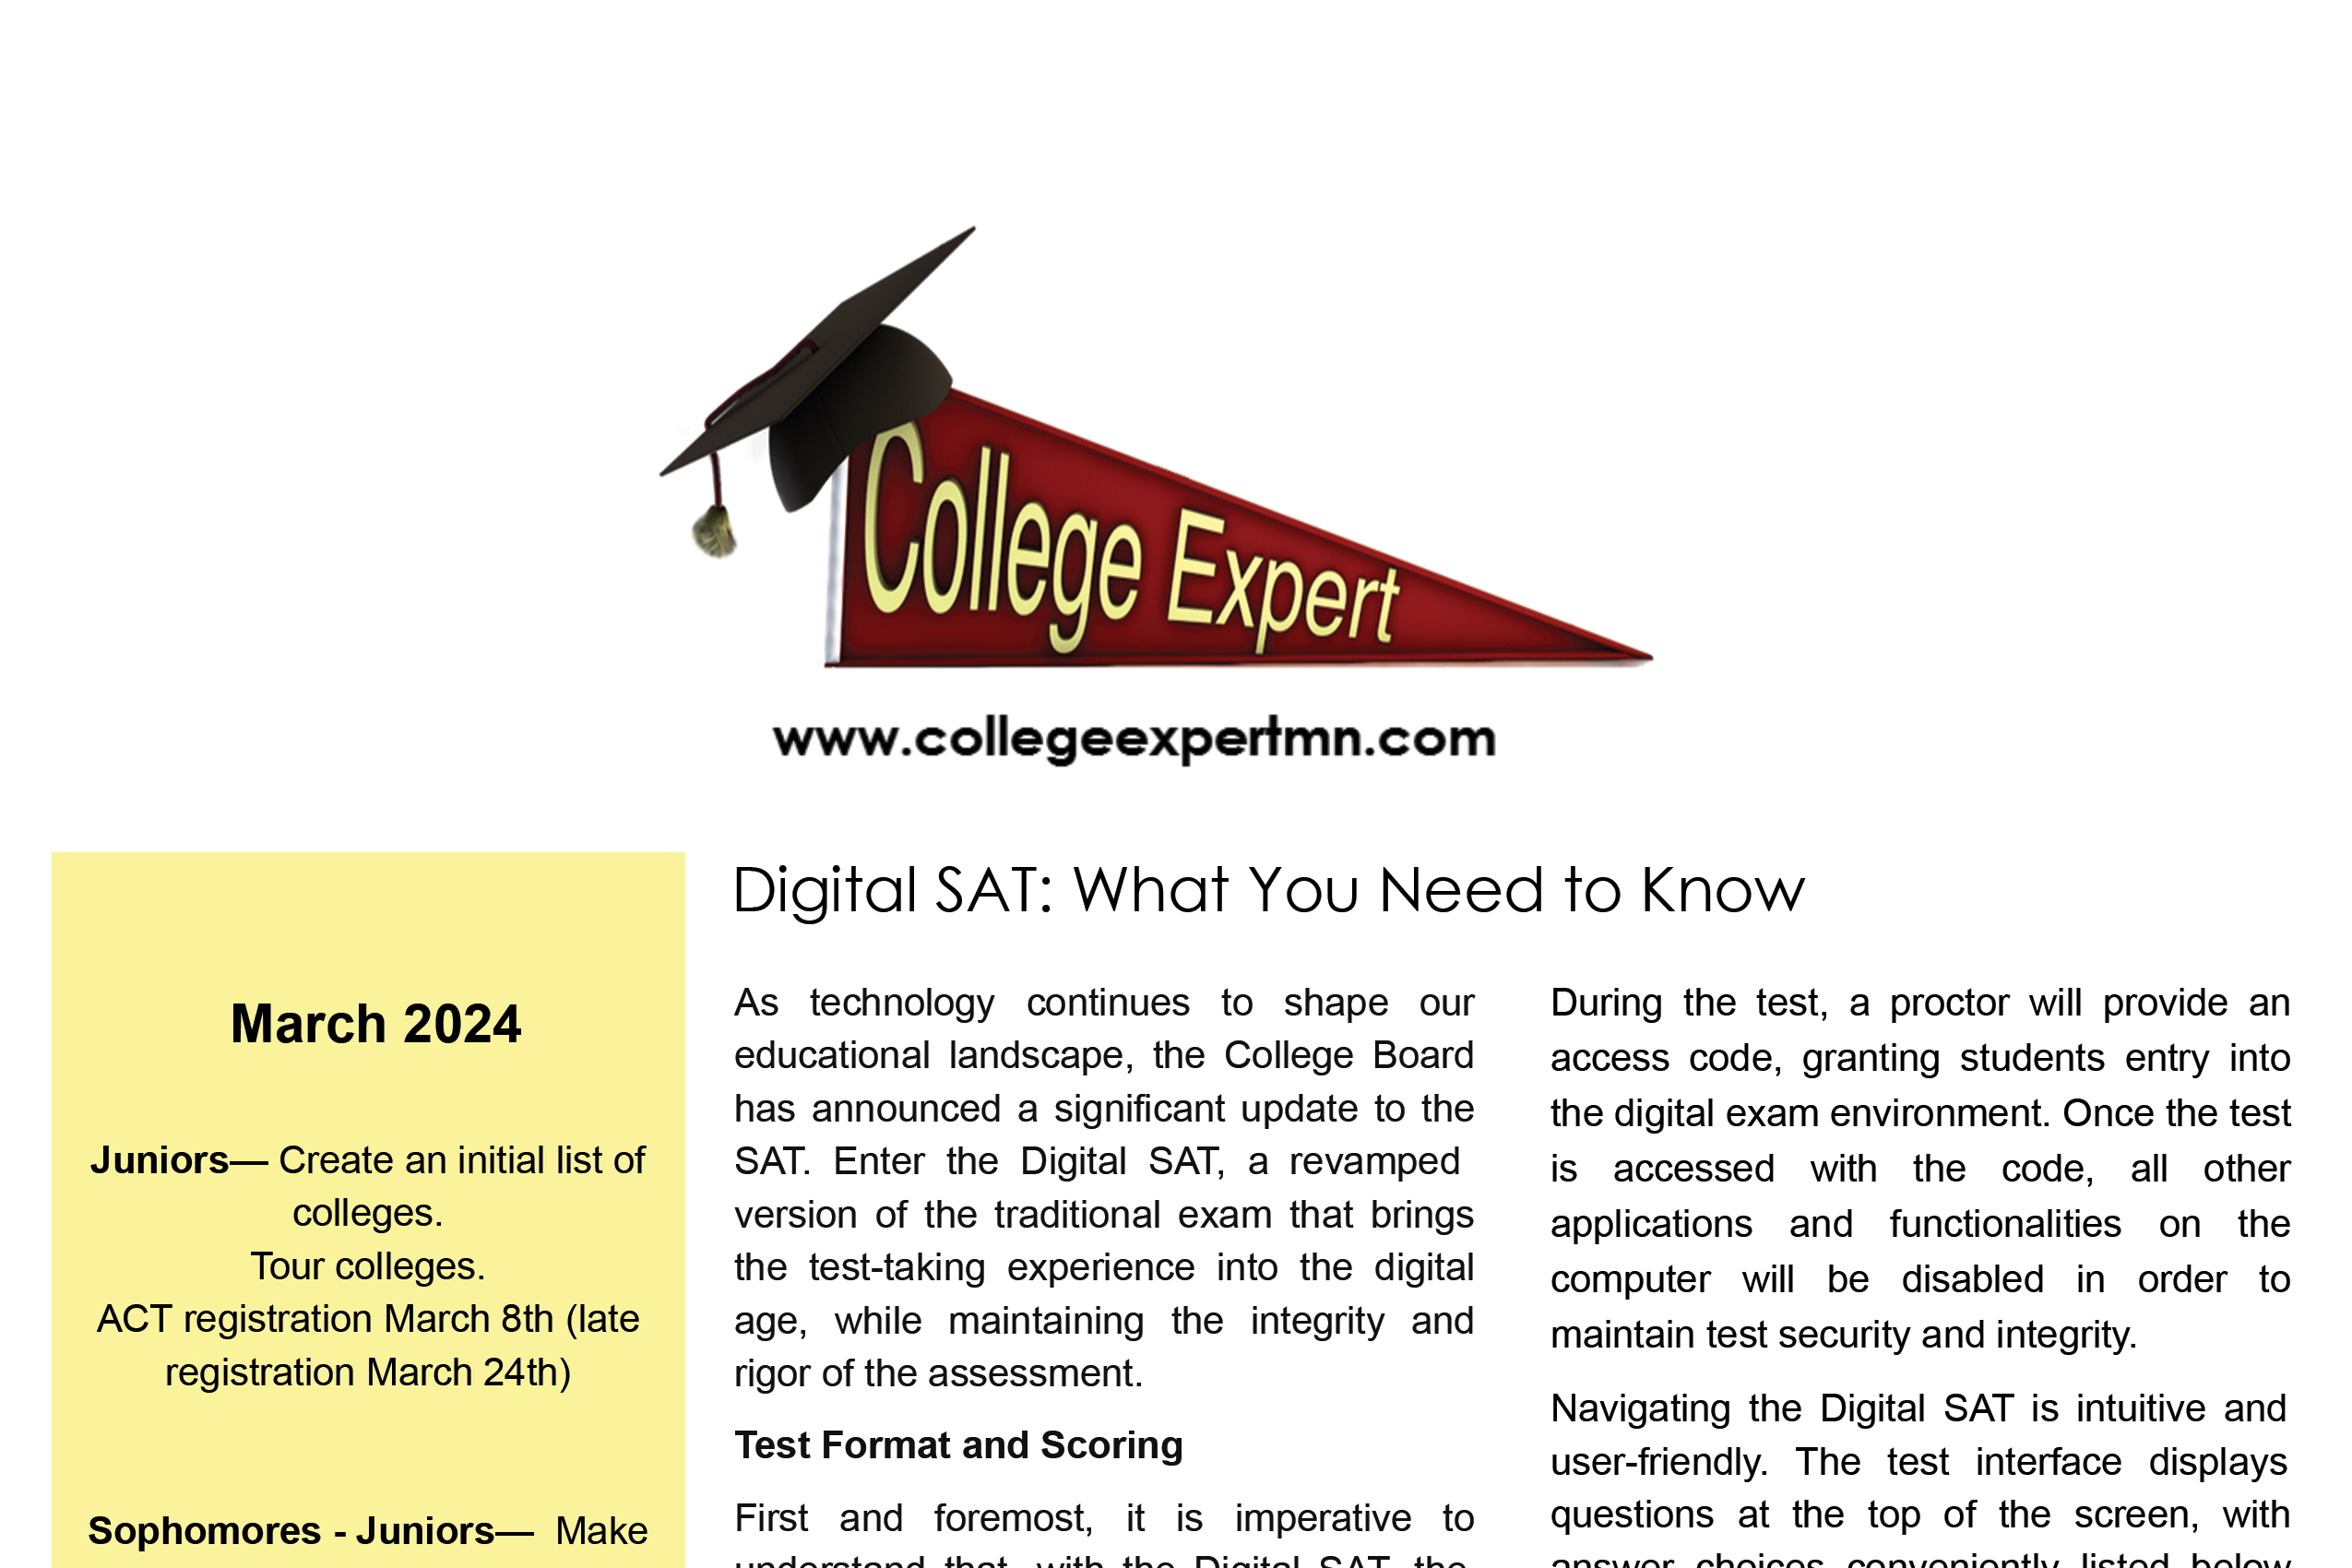 Featured image for “March College Expert Newsletter”